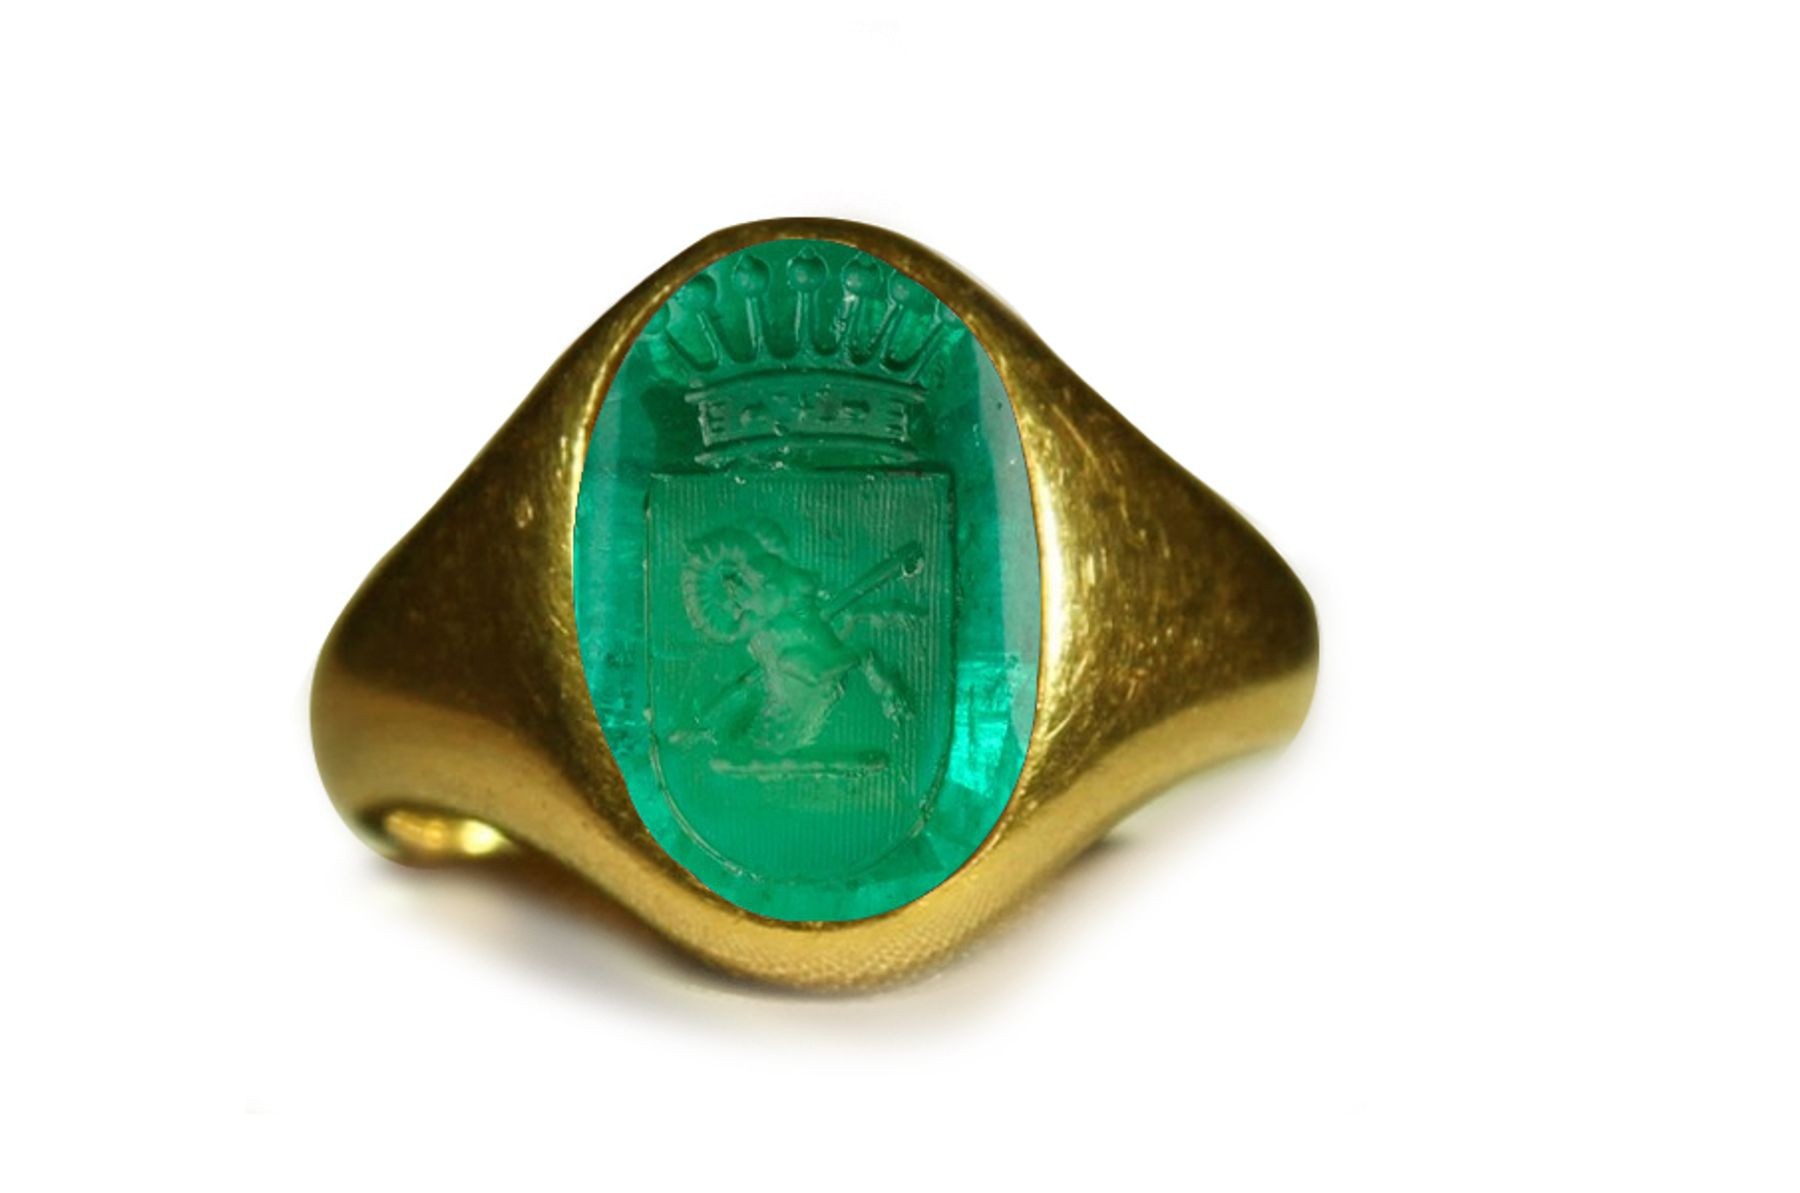 Men's Old English Rings: An Ancient Rich Forest Green Color & Vibrant Egypt Emerald Red Sea in Gold Signet Ring